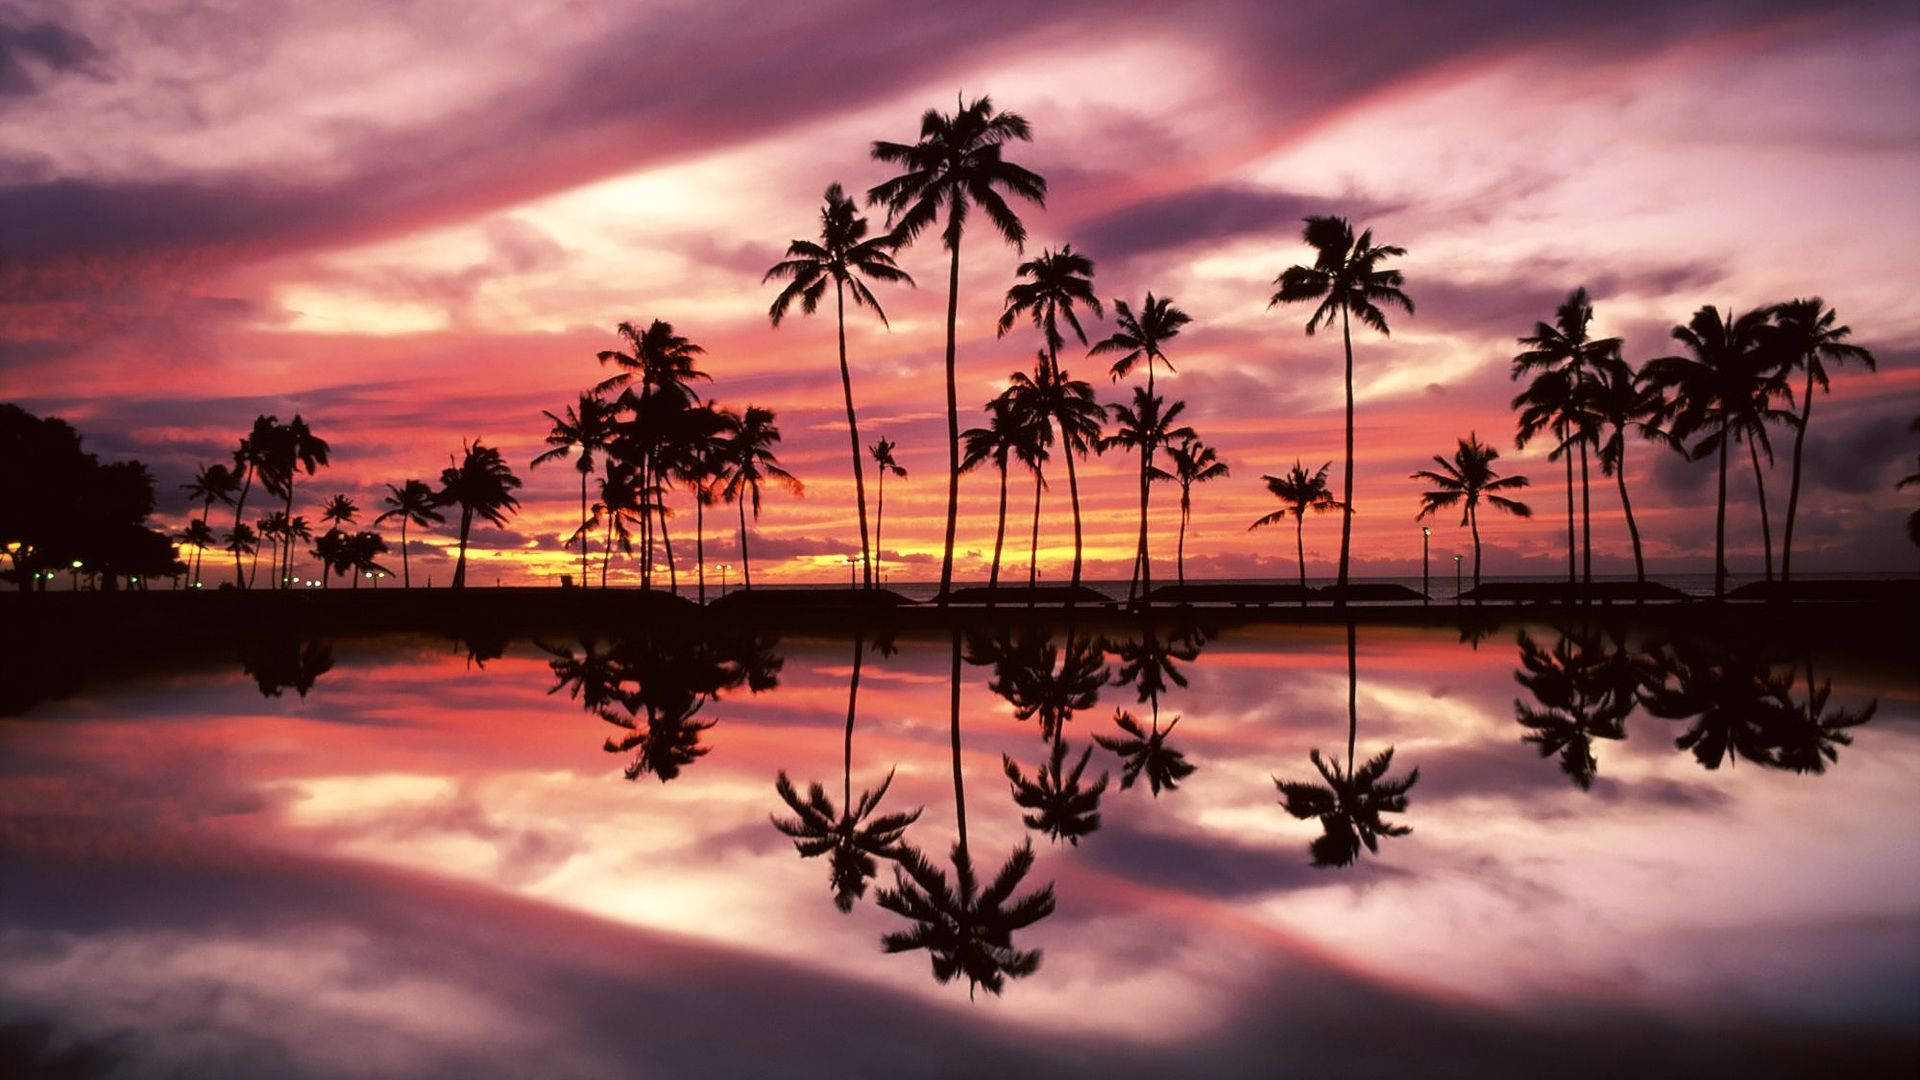 palm trees reflected in a pond at sunset Wallpaper